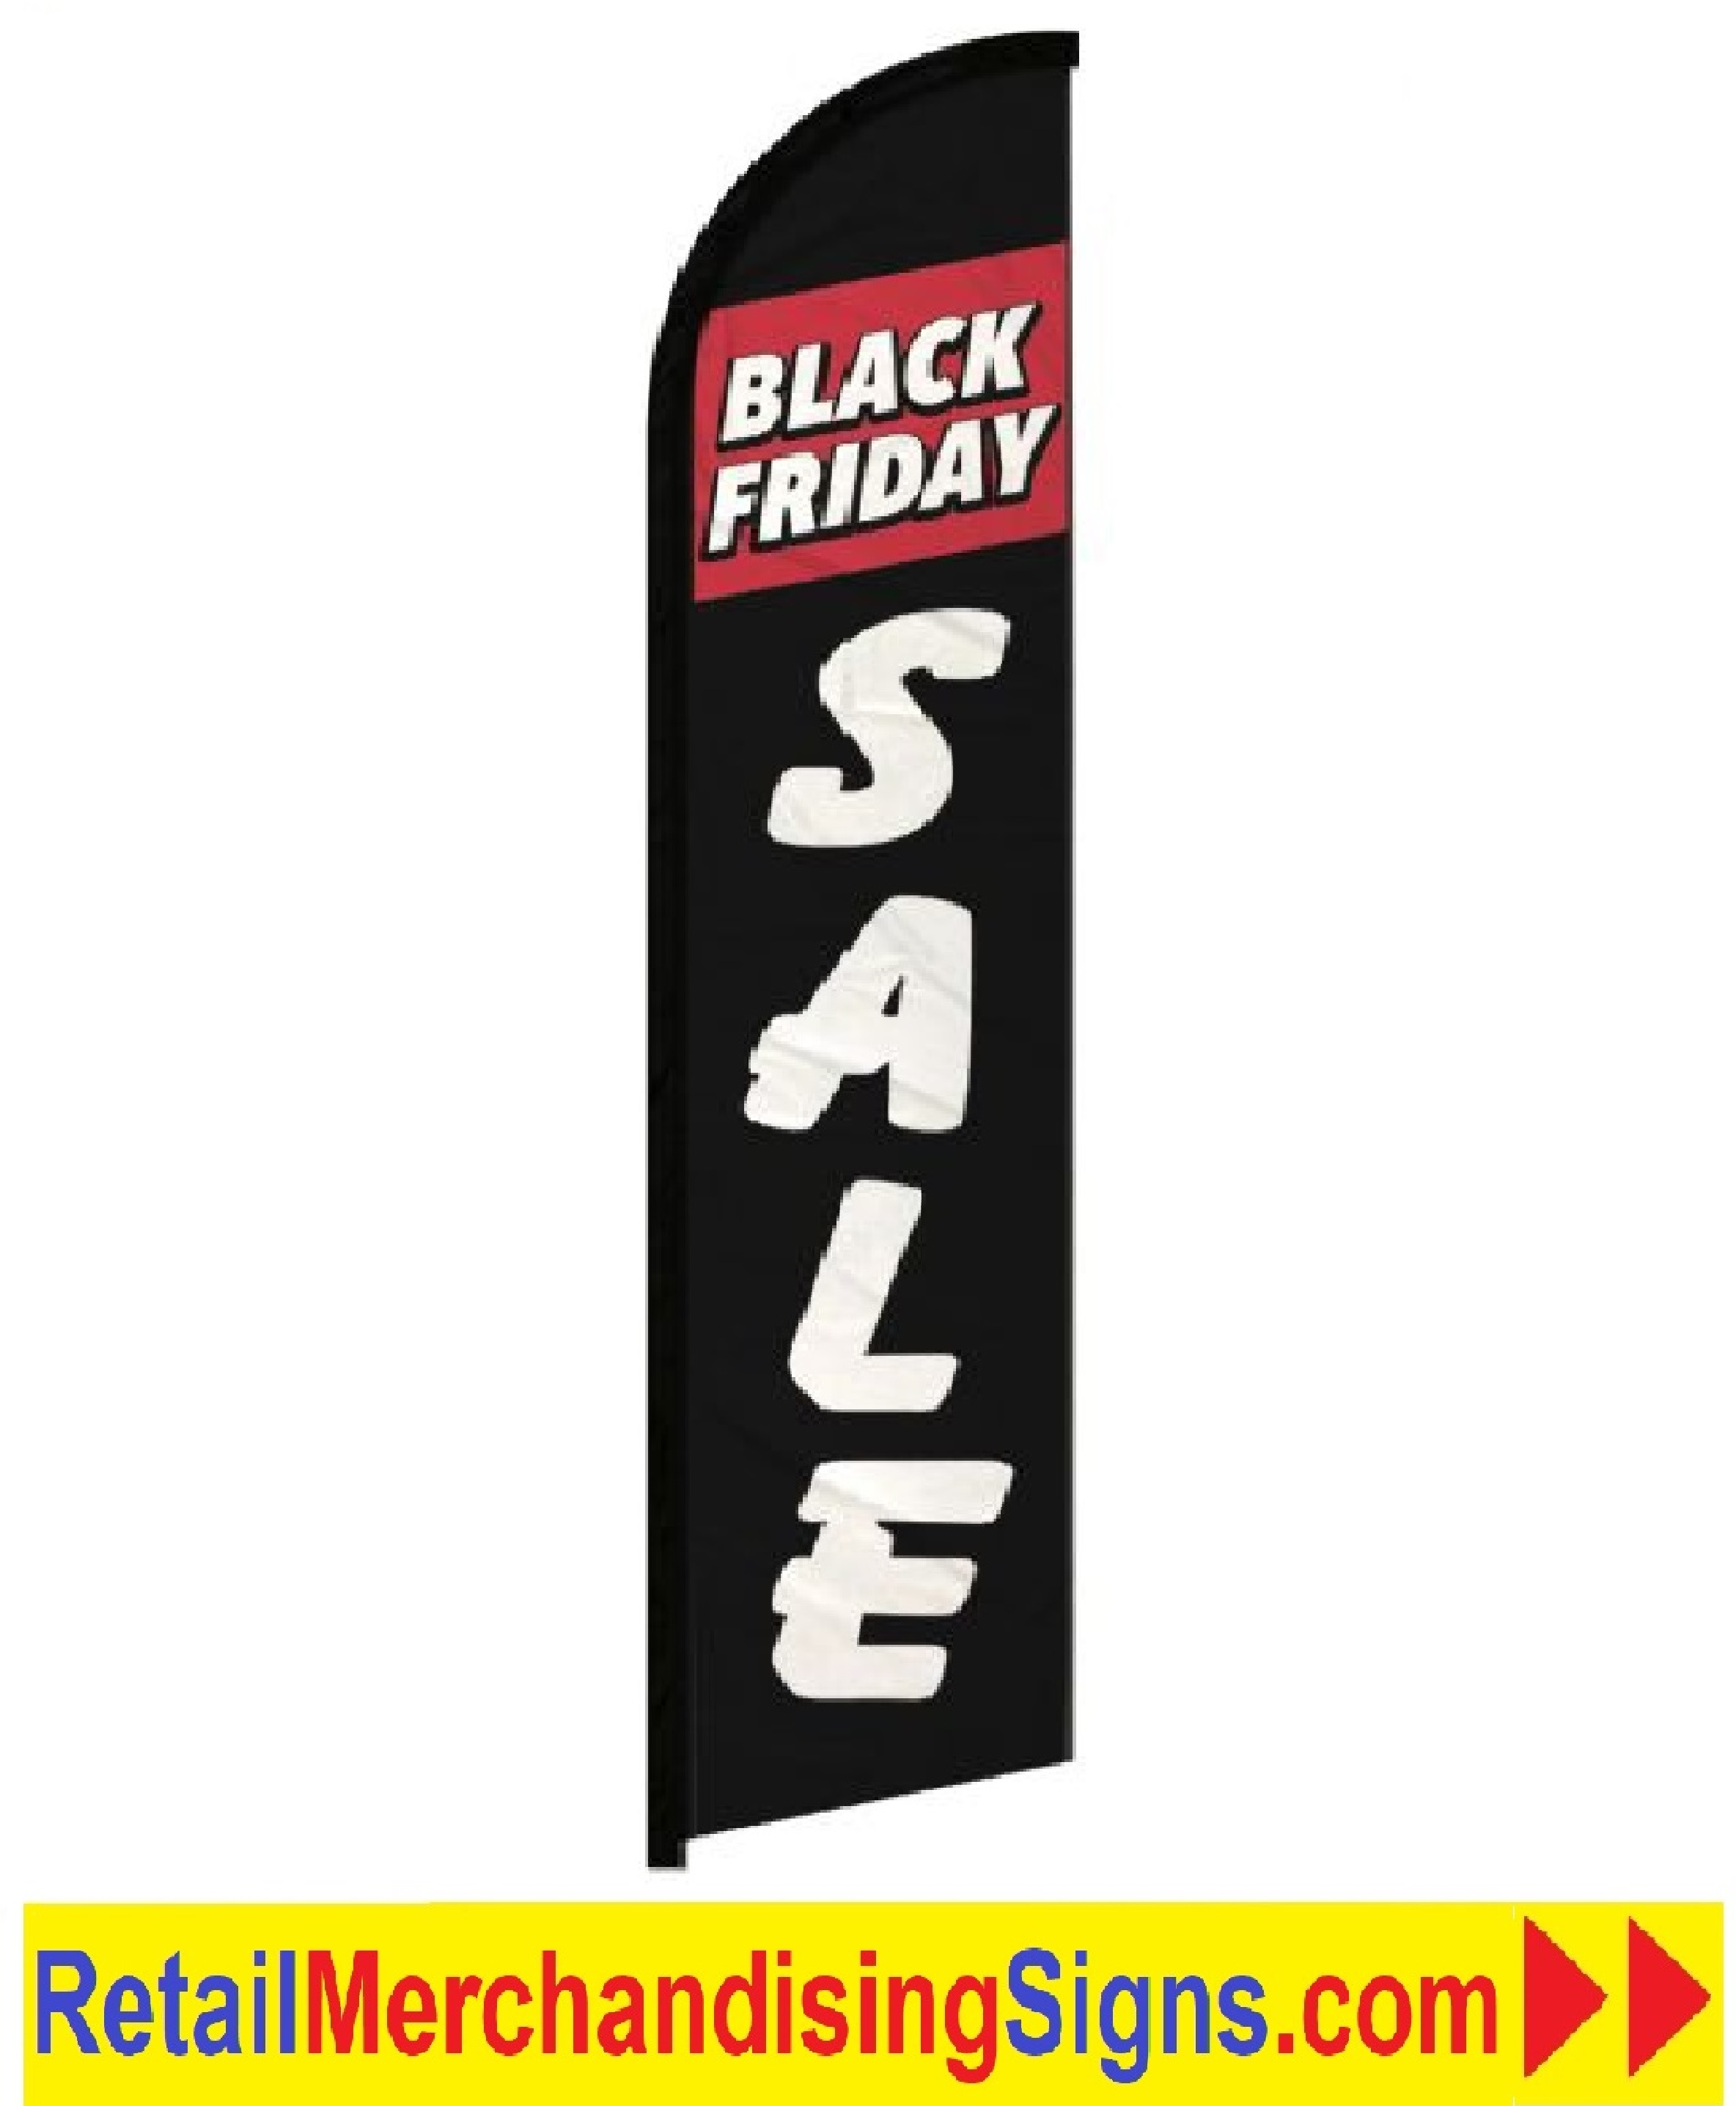 SNK310 BLACK FRIDAY SALE Flag KIT, Windless Swooper Flags (with 15' pole)